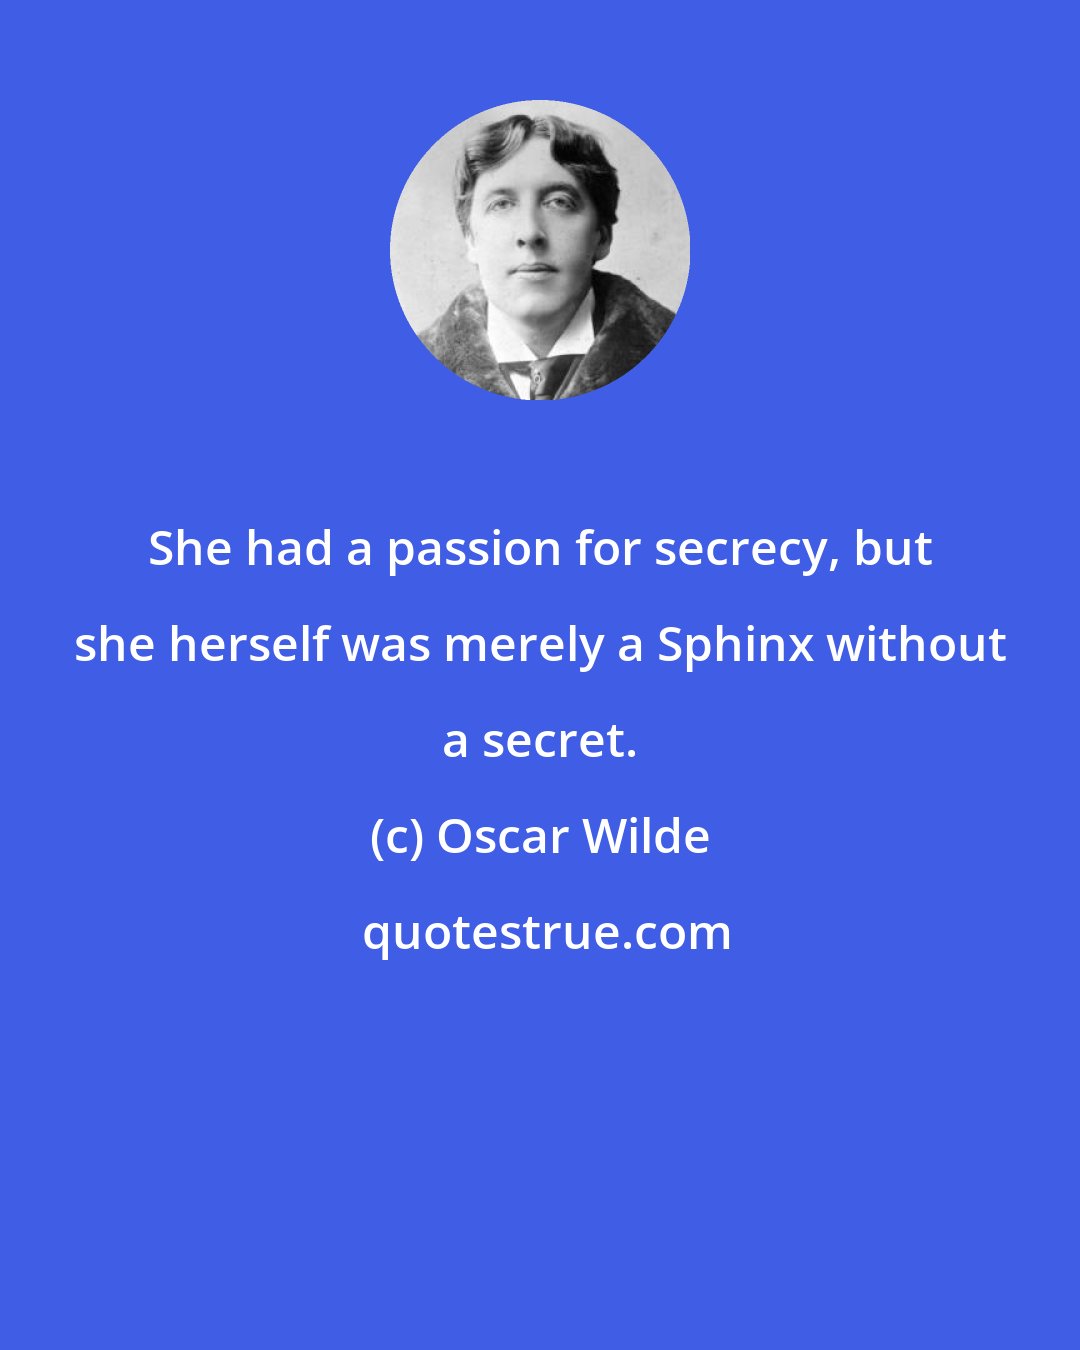 Oscar Wilde: She had a passion for secrecy, but she herself was merely a Sphinx without a secret.